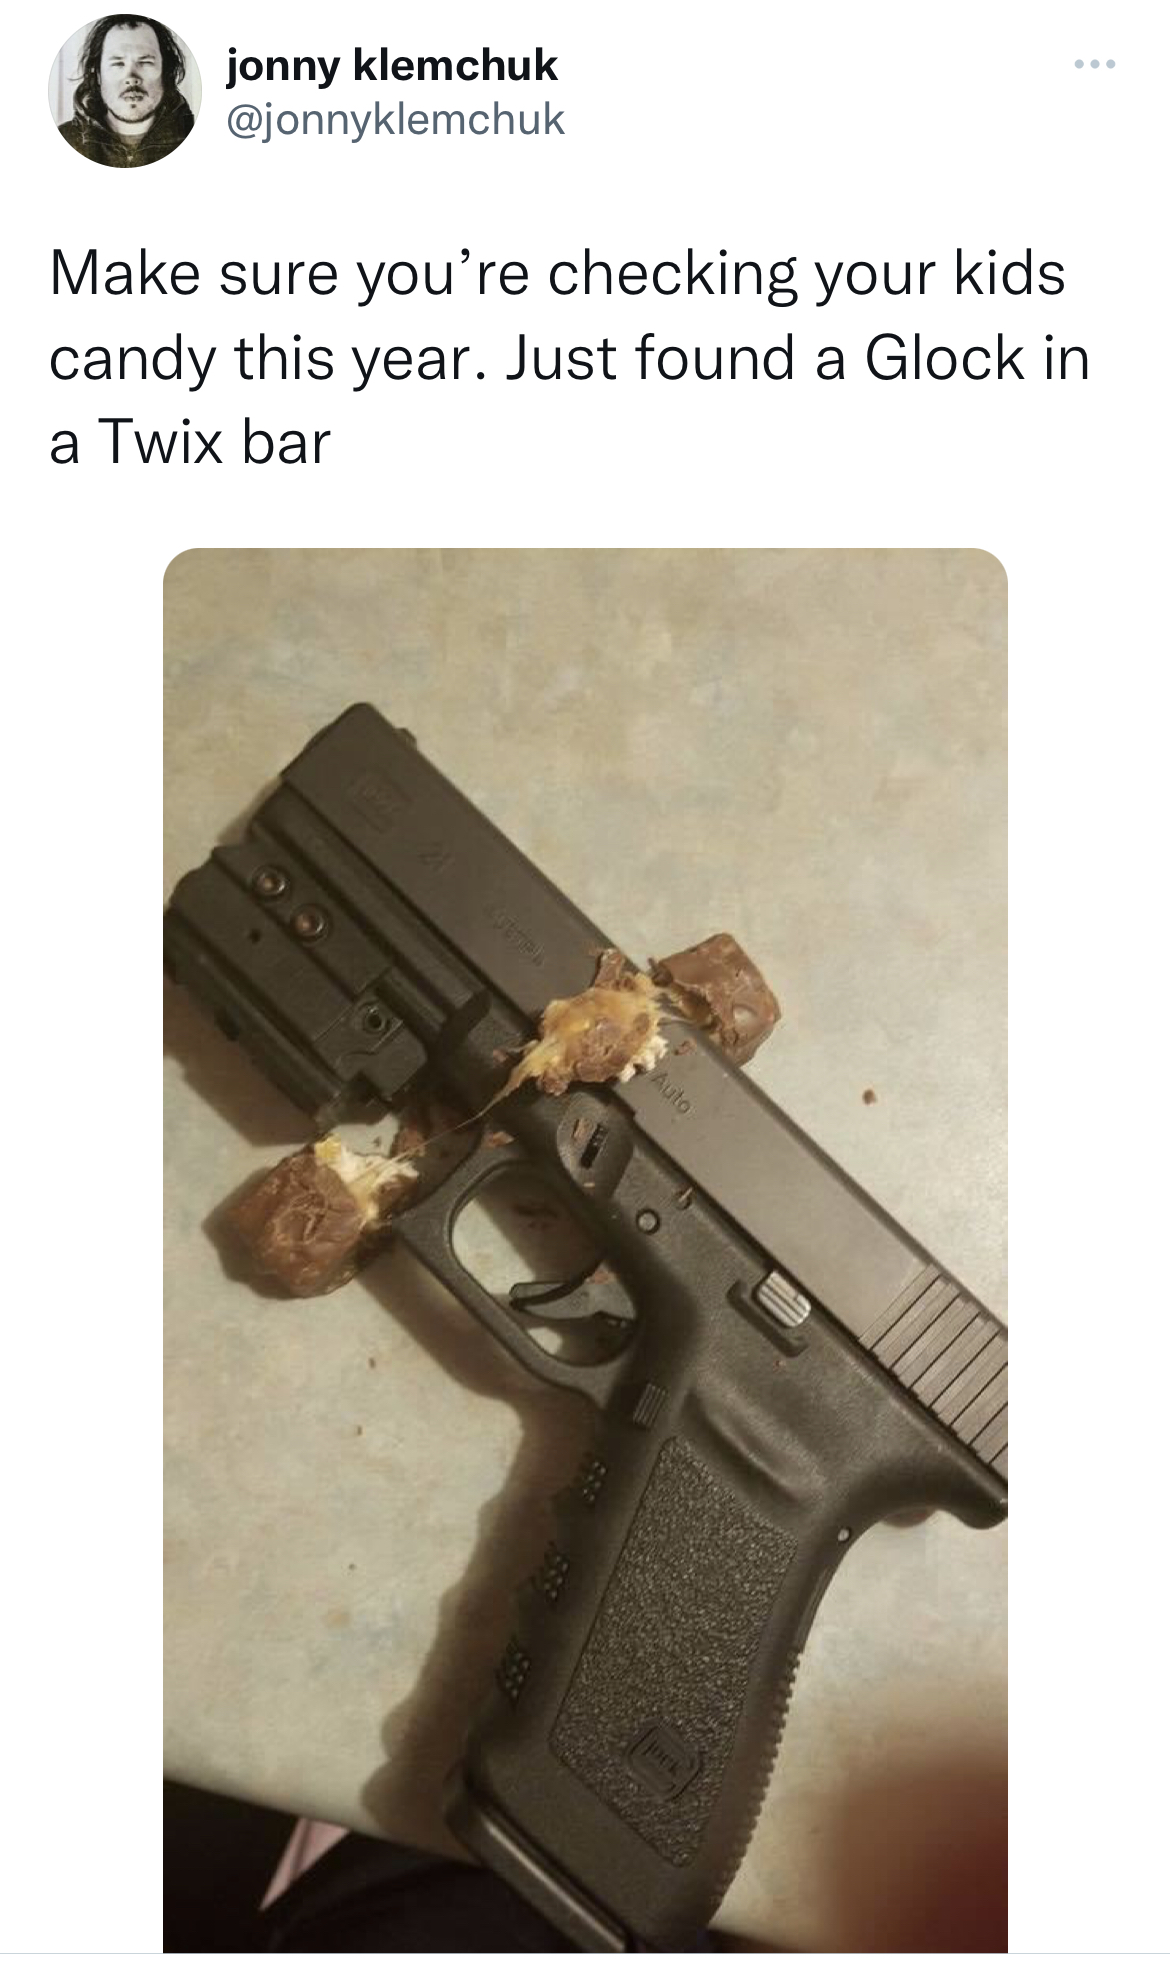 savage and funny tweets - firearm - jonny klemchuk Make sure you're checking your kids candy this year. Just found a Glock in a Twix bar